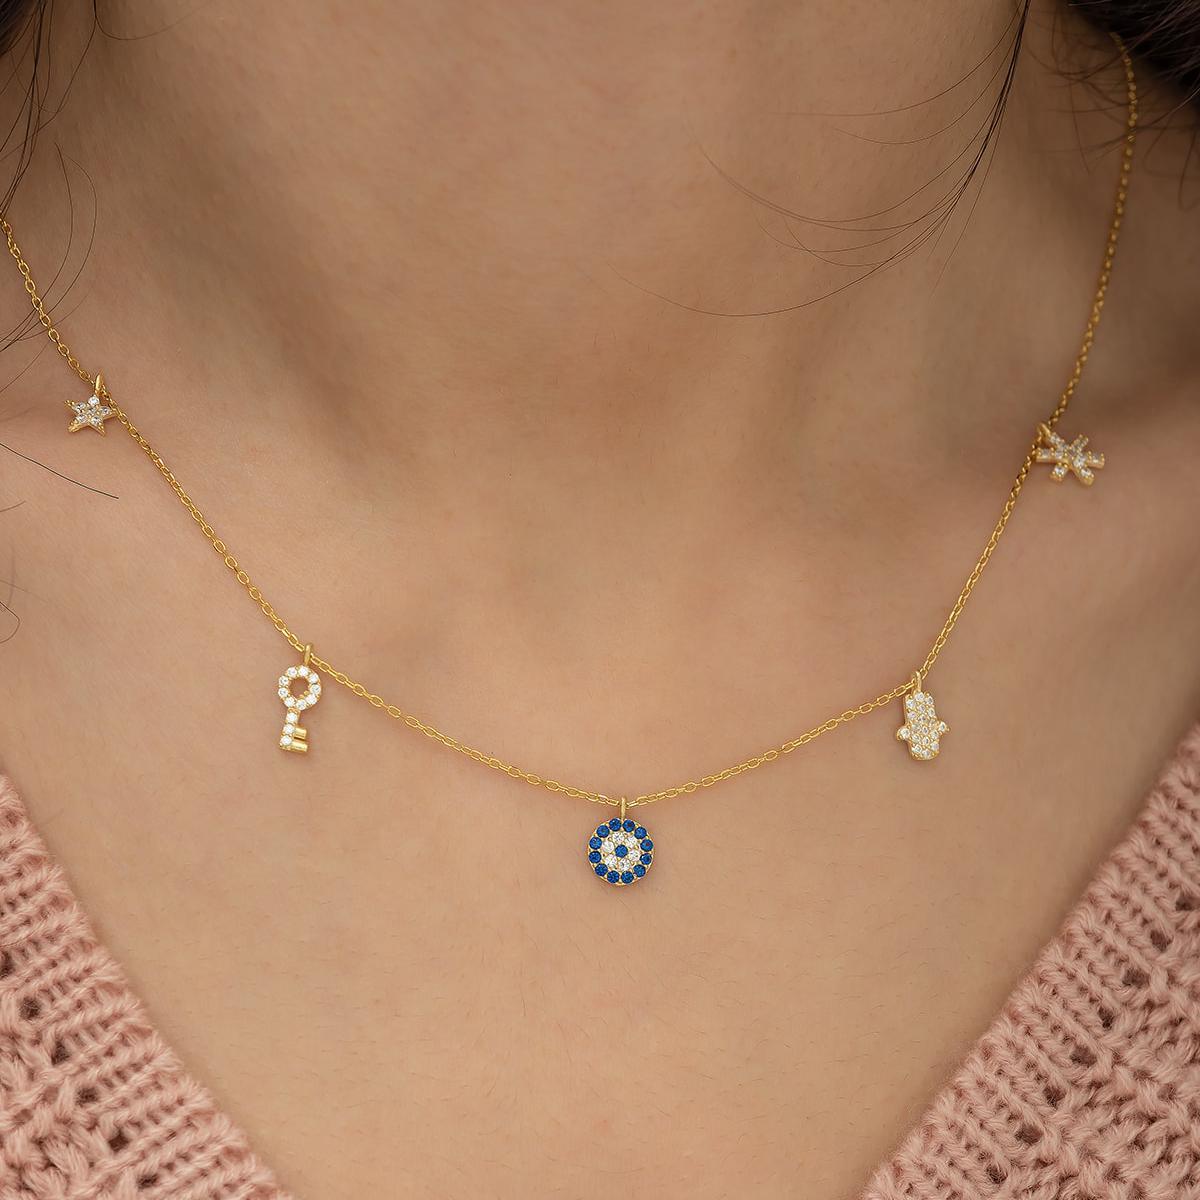 Luck Necklace Gold • Good Luck Necklace • 7 Rings Of Luck Necklace - Trending Silver Gifts